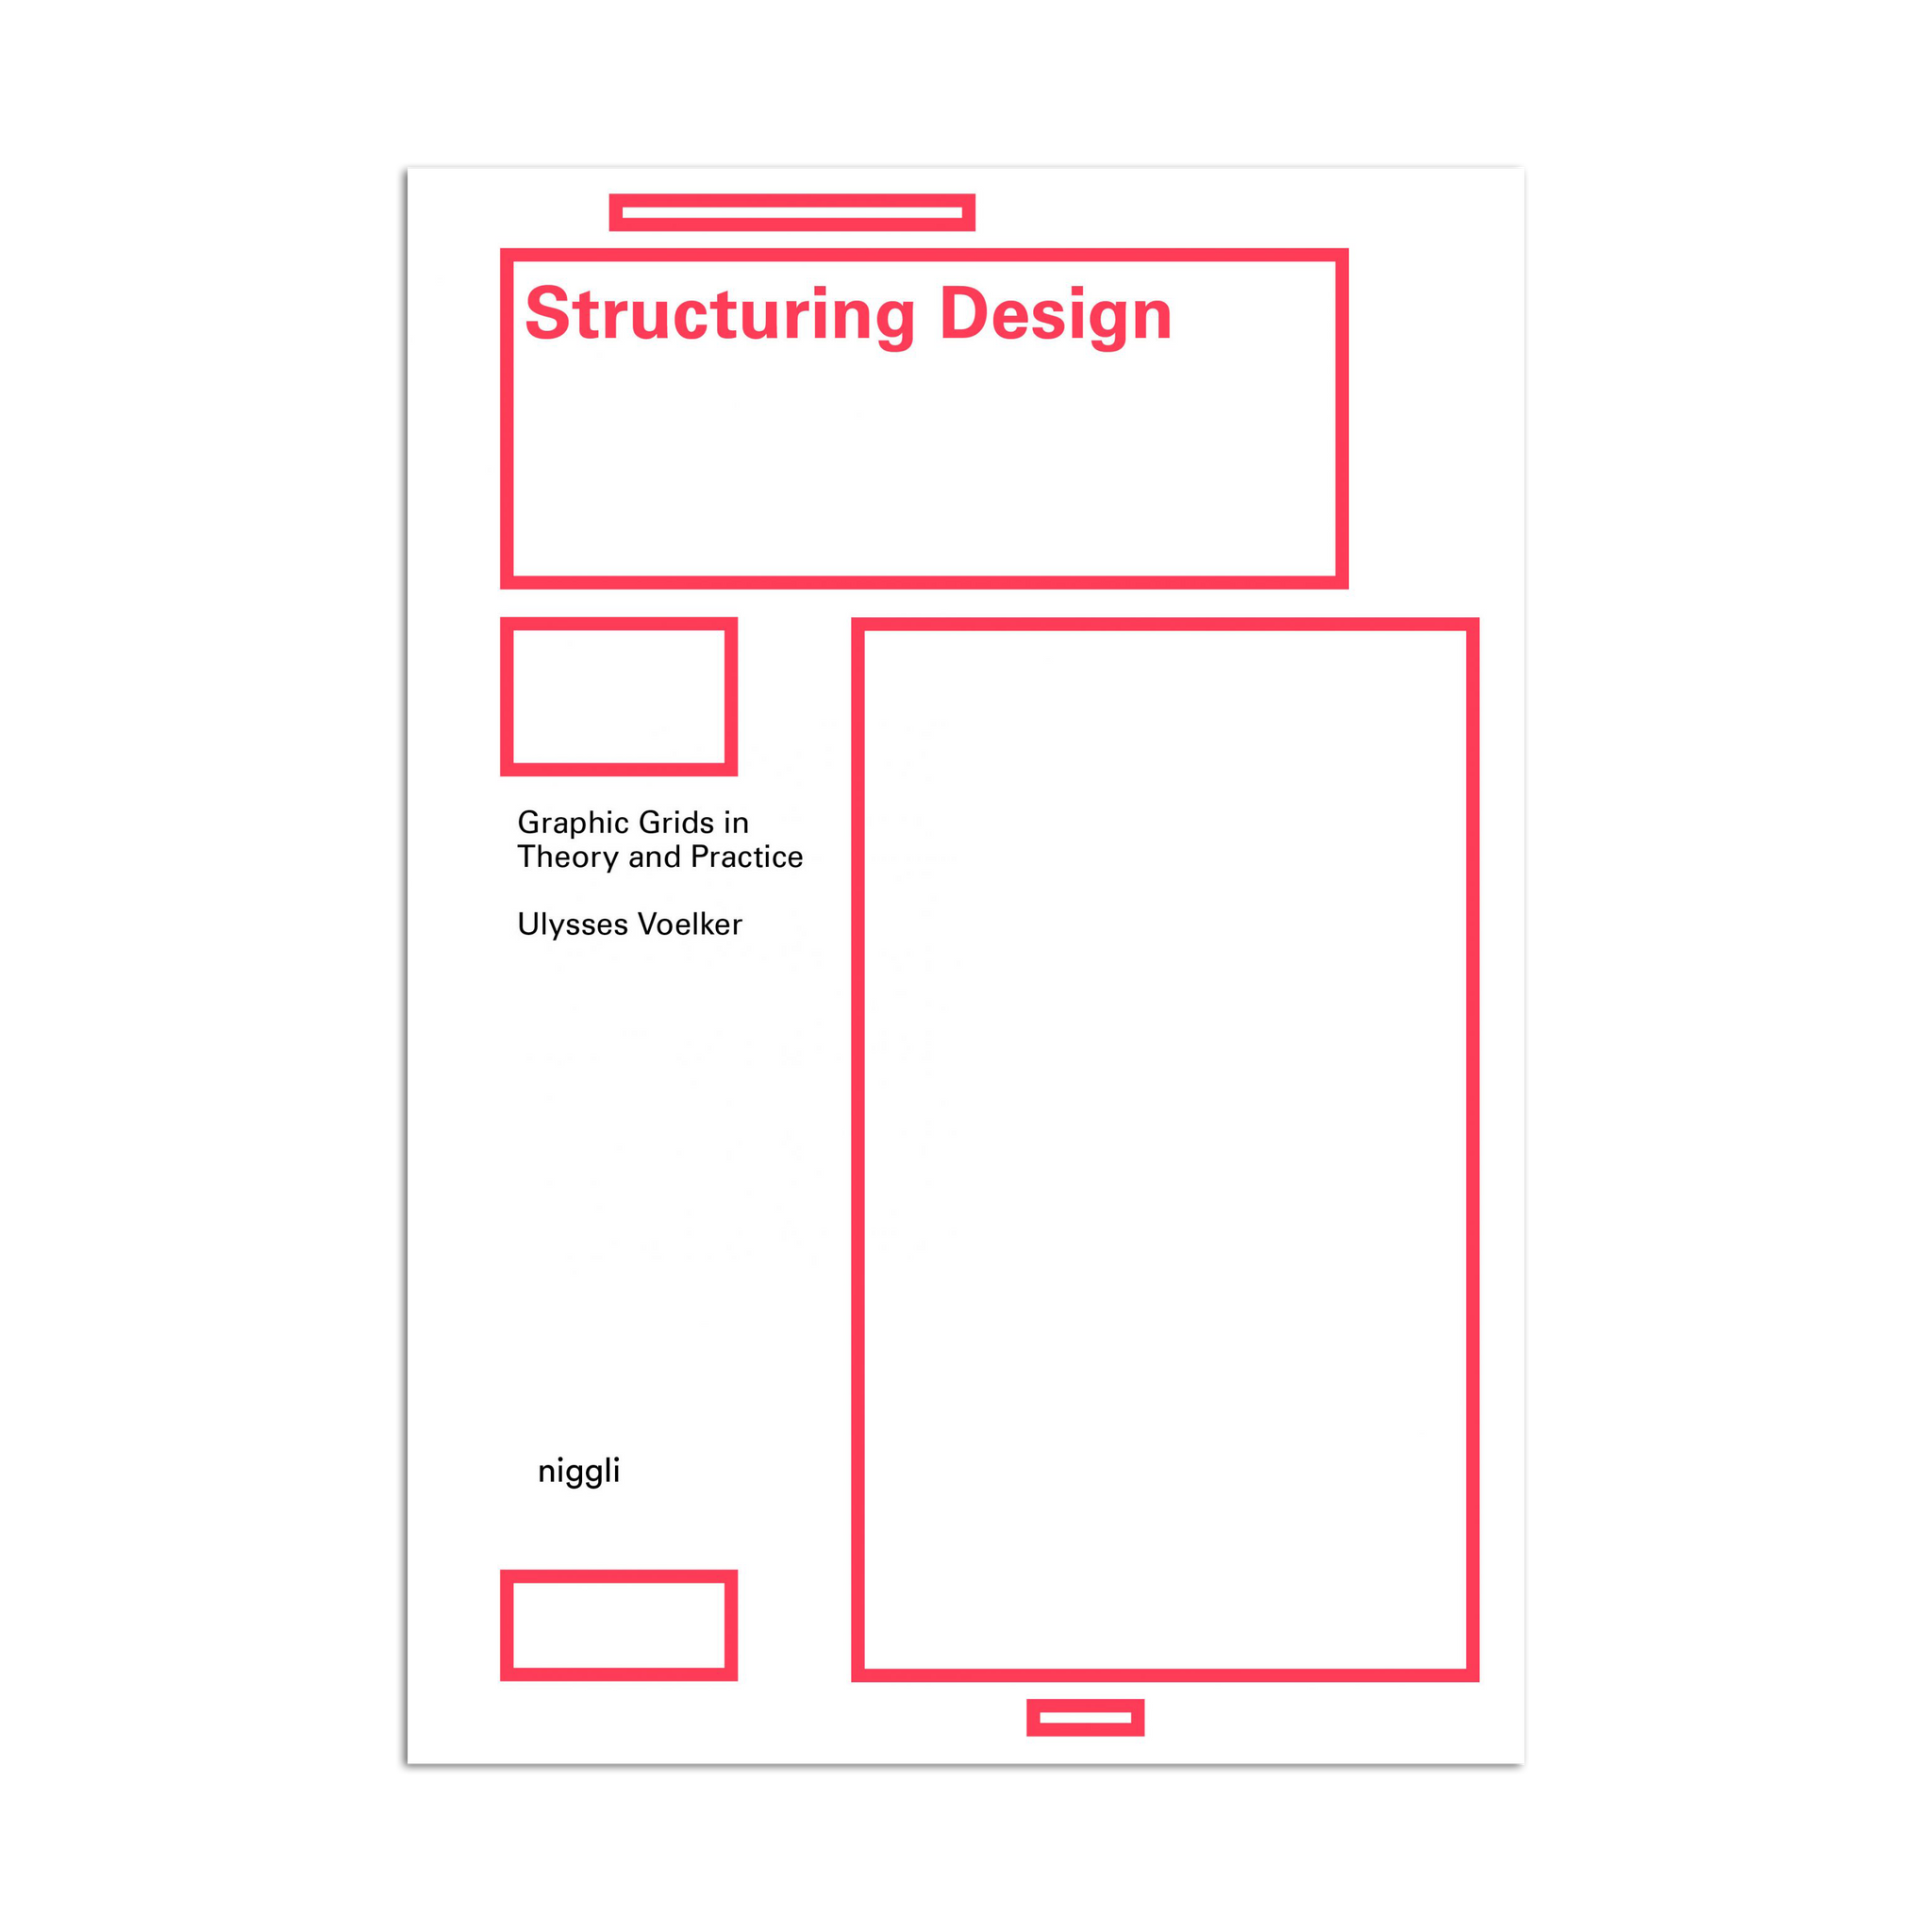 Structuring Design: Graphic Grids in Theory and Practice by Ulysses Voelker